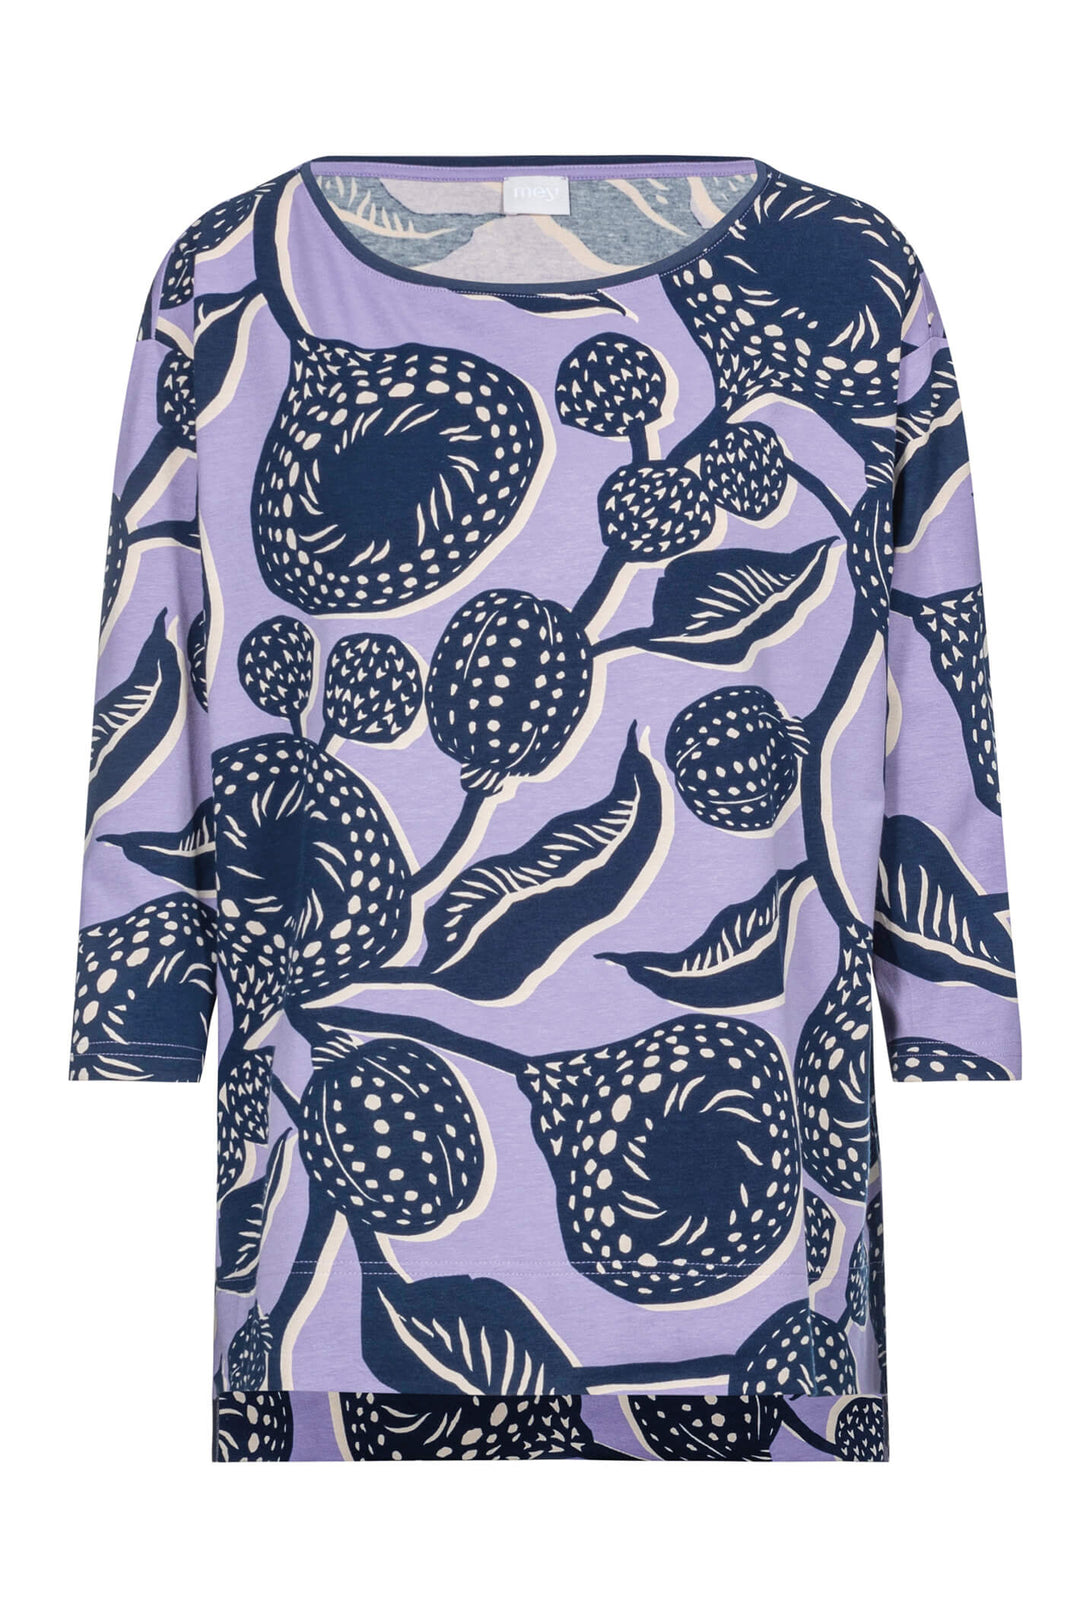 Mey 17438 197 Night 2 Day Lilac Print Top - Shirley Allum Boutique